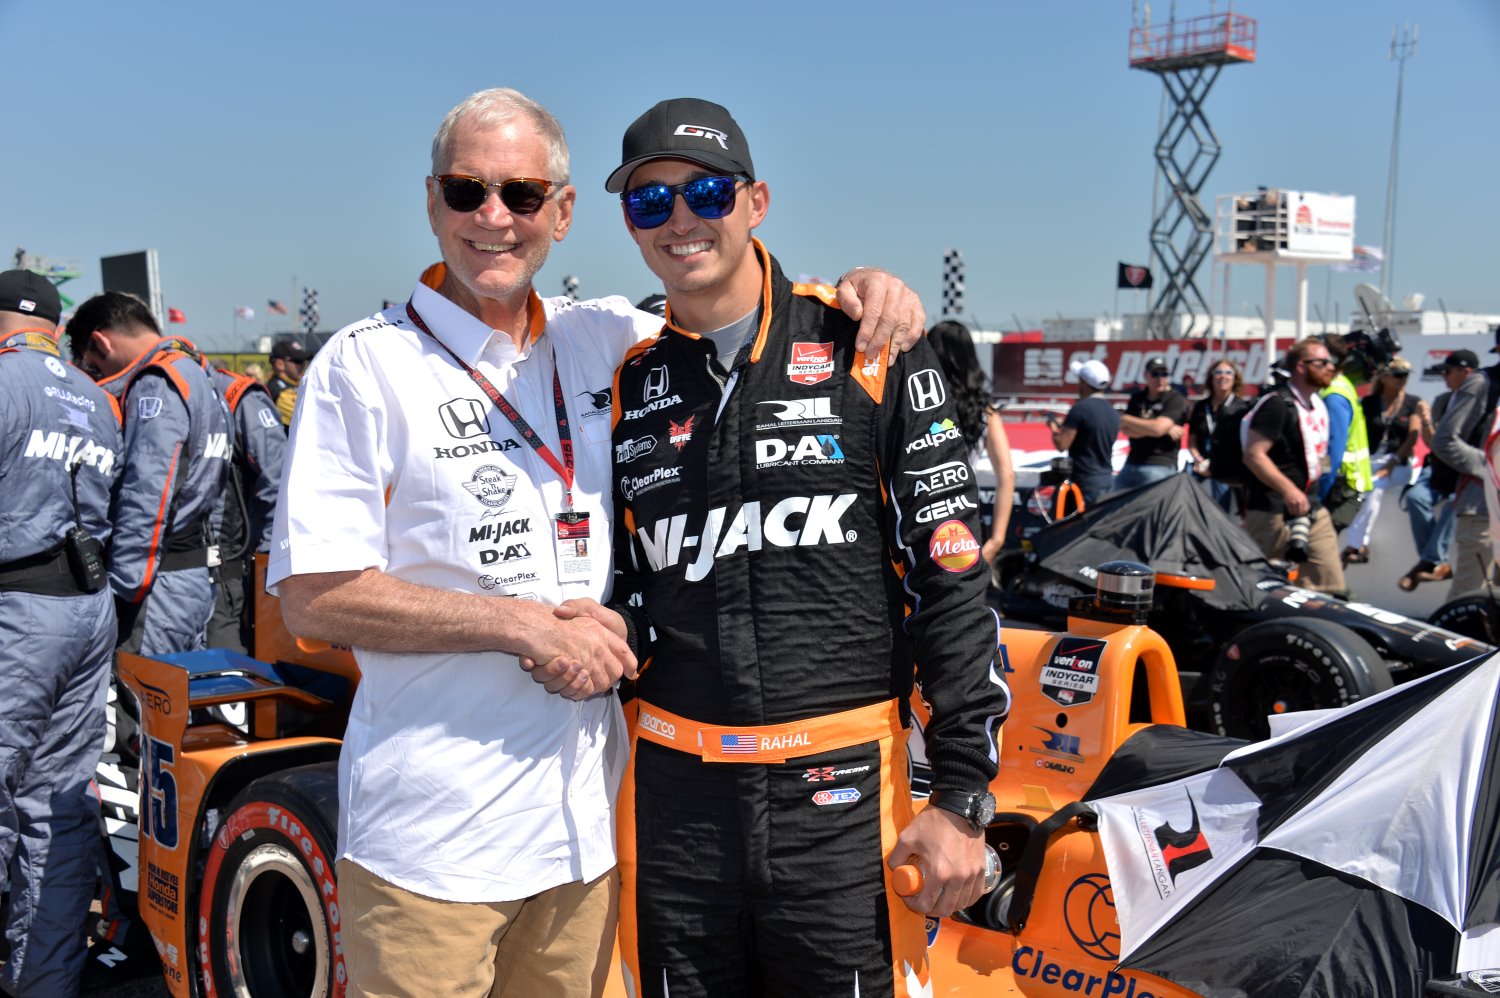 Letterman with his driver Rahal